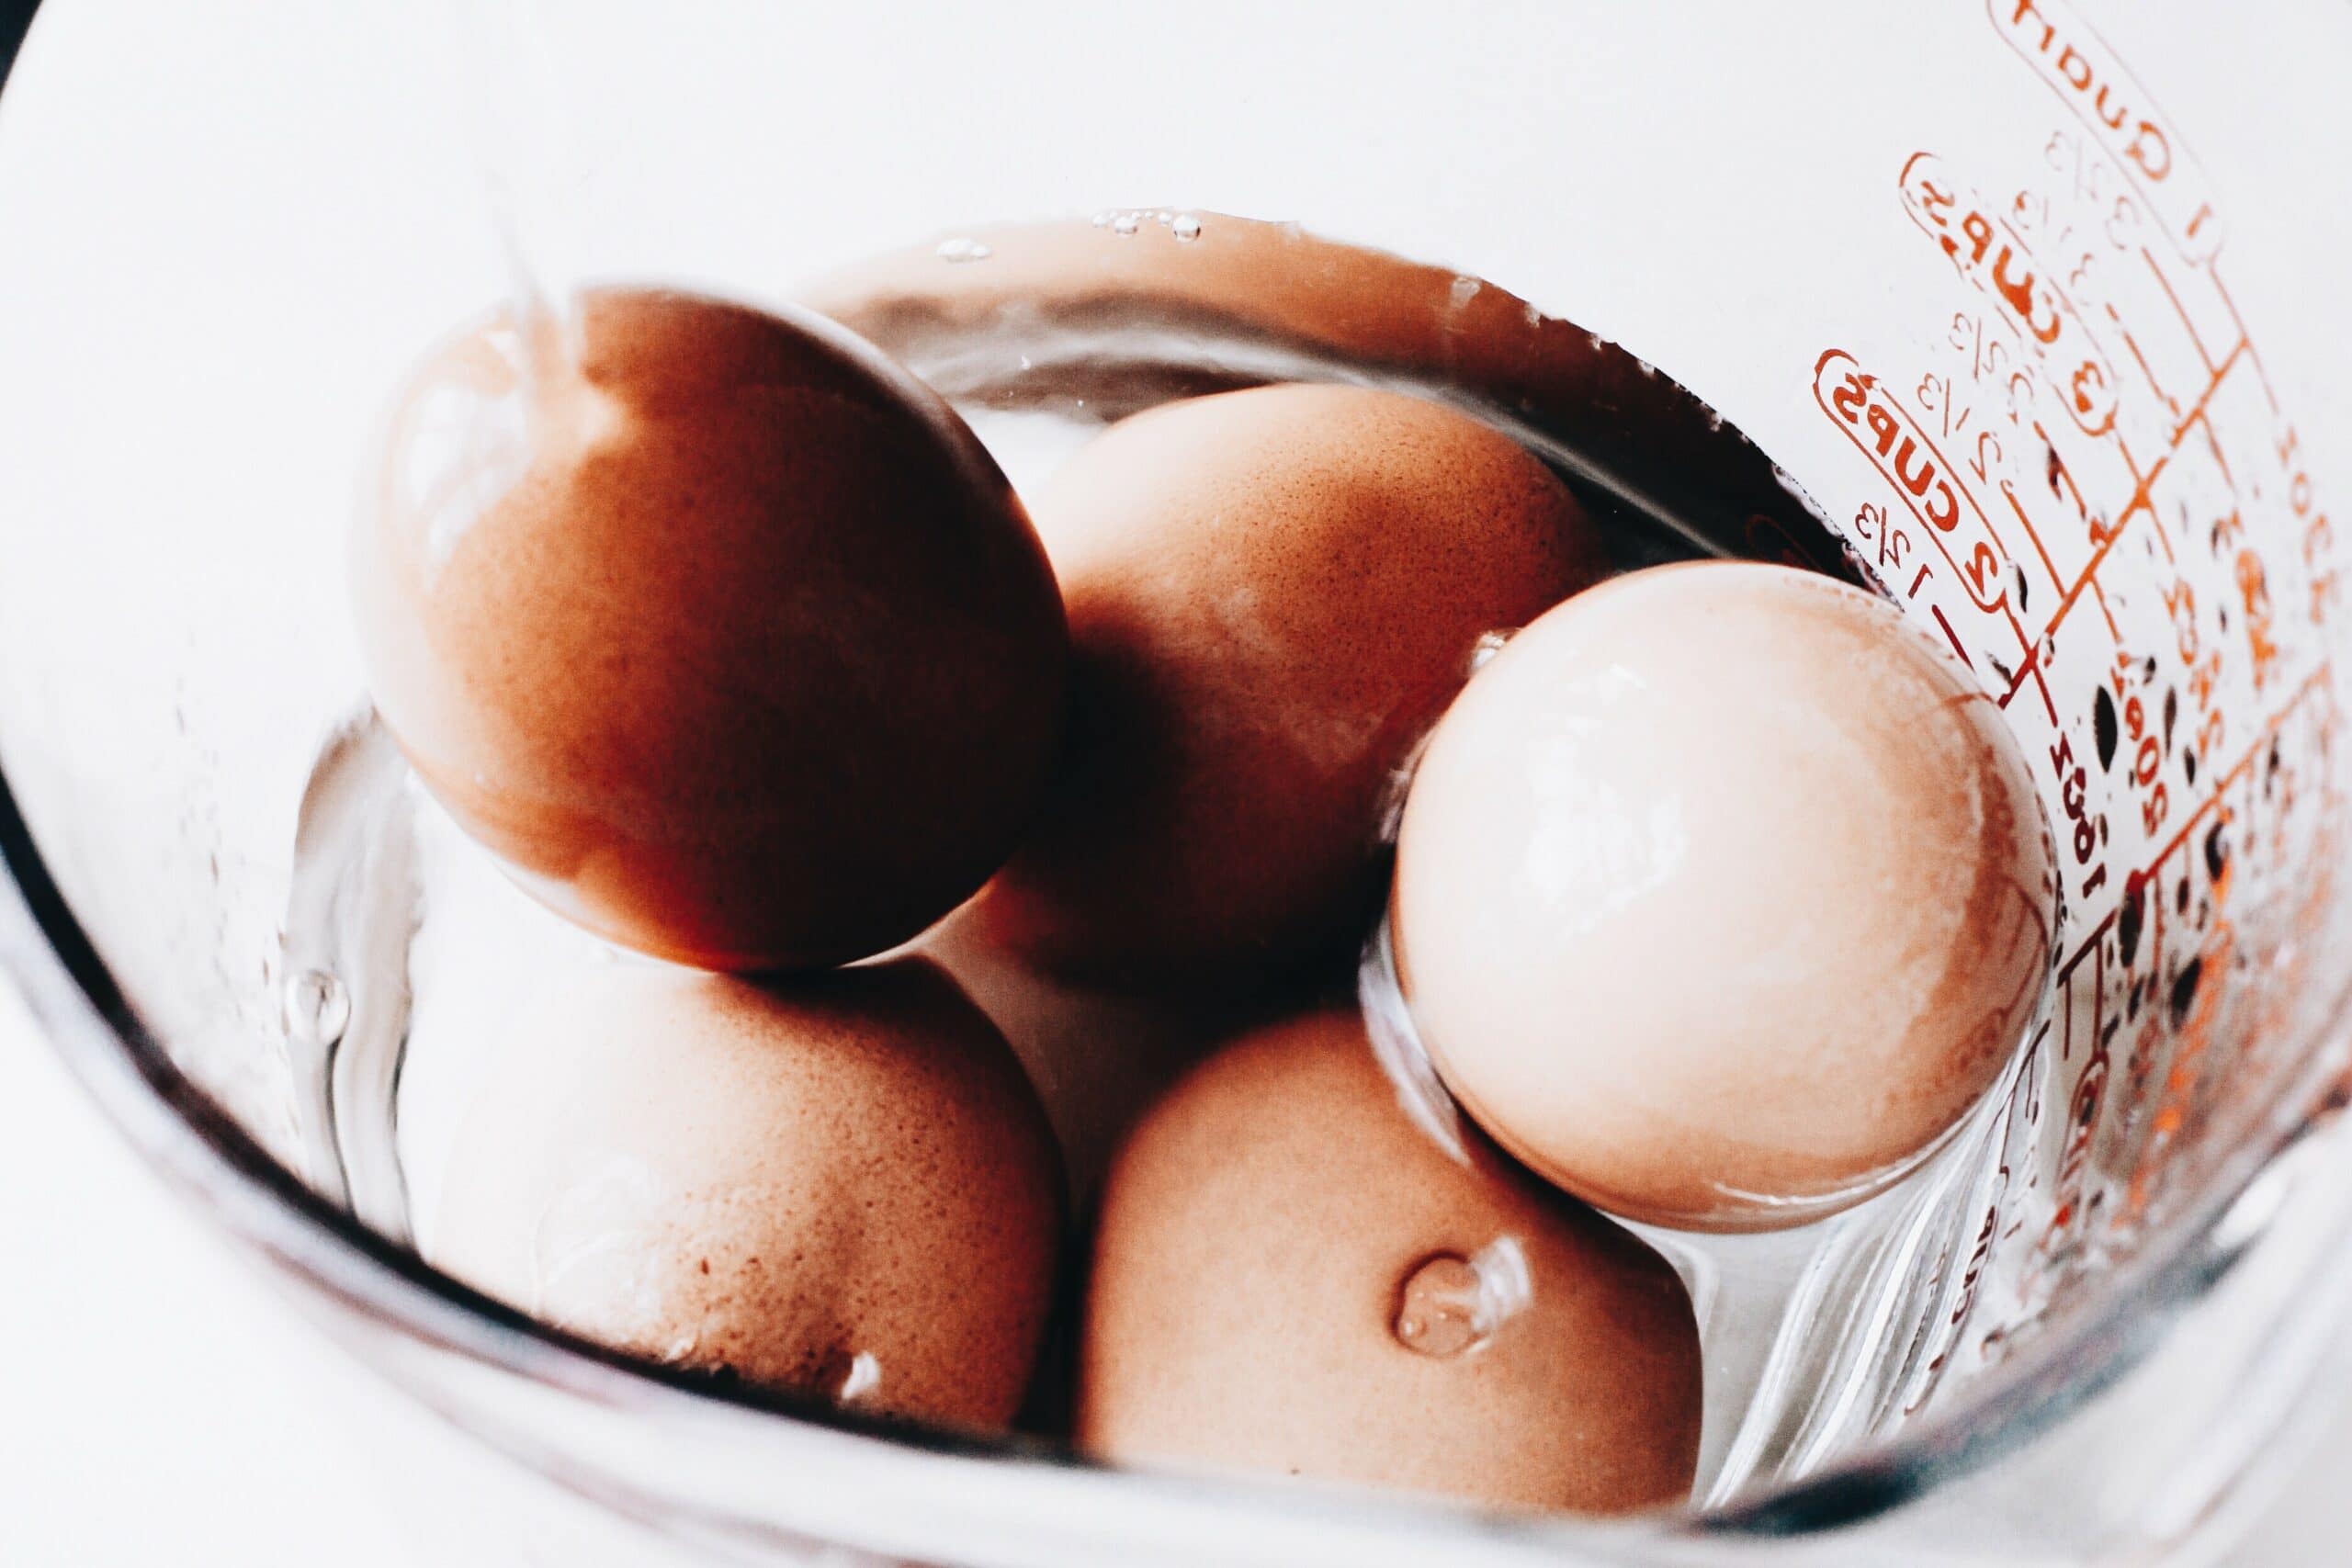 How to Bring Eggs to Room Temperature Quickly | Sophisticated Gourmet